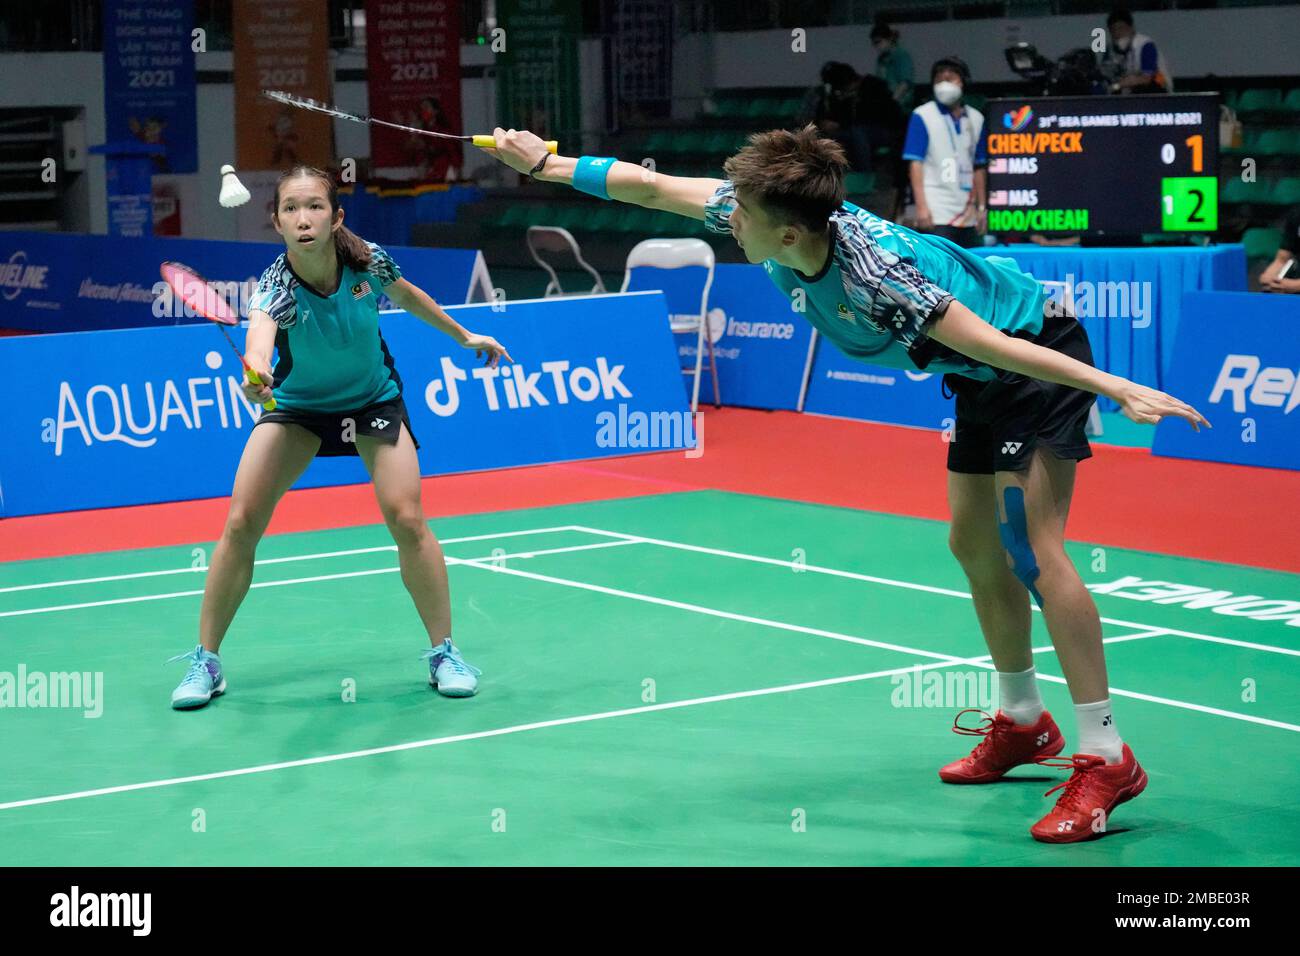 Malaysias Hoo Pang Ron, right, and Cheah Yee See compete against their compatriots Chen Tang Jie and Peck Yen Wei during their mixed doubles badminton final match at the 31st Southeast Asian